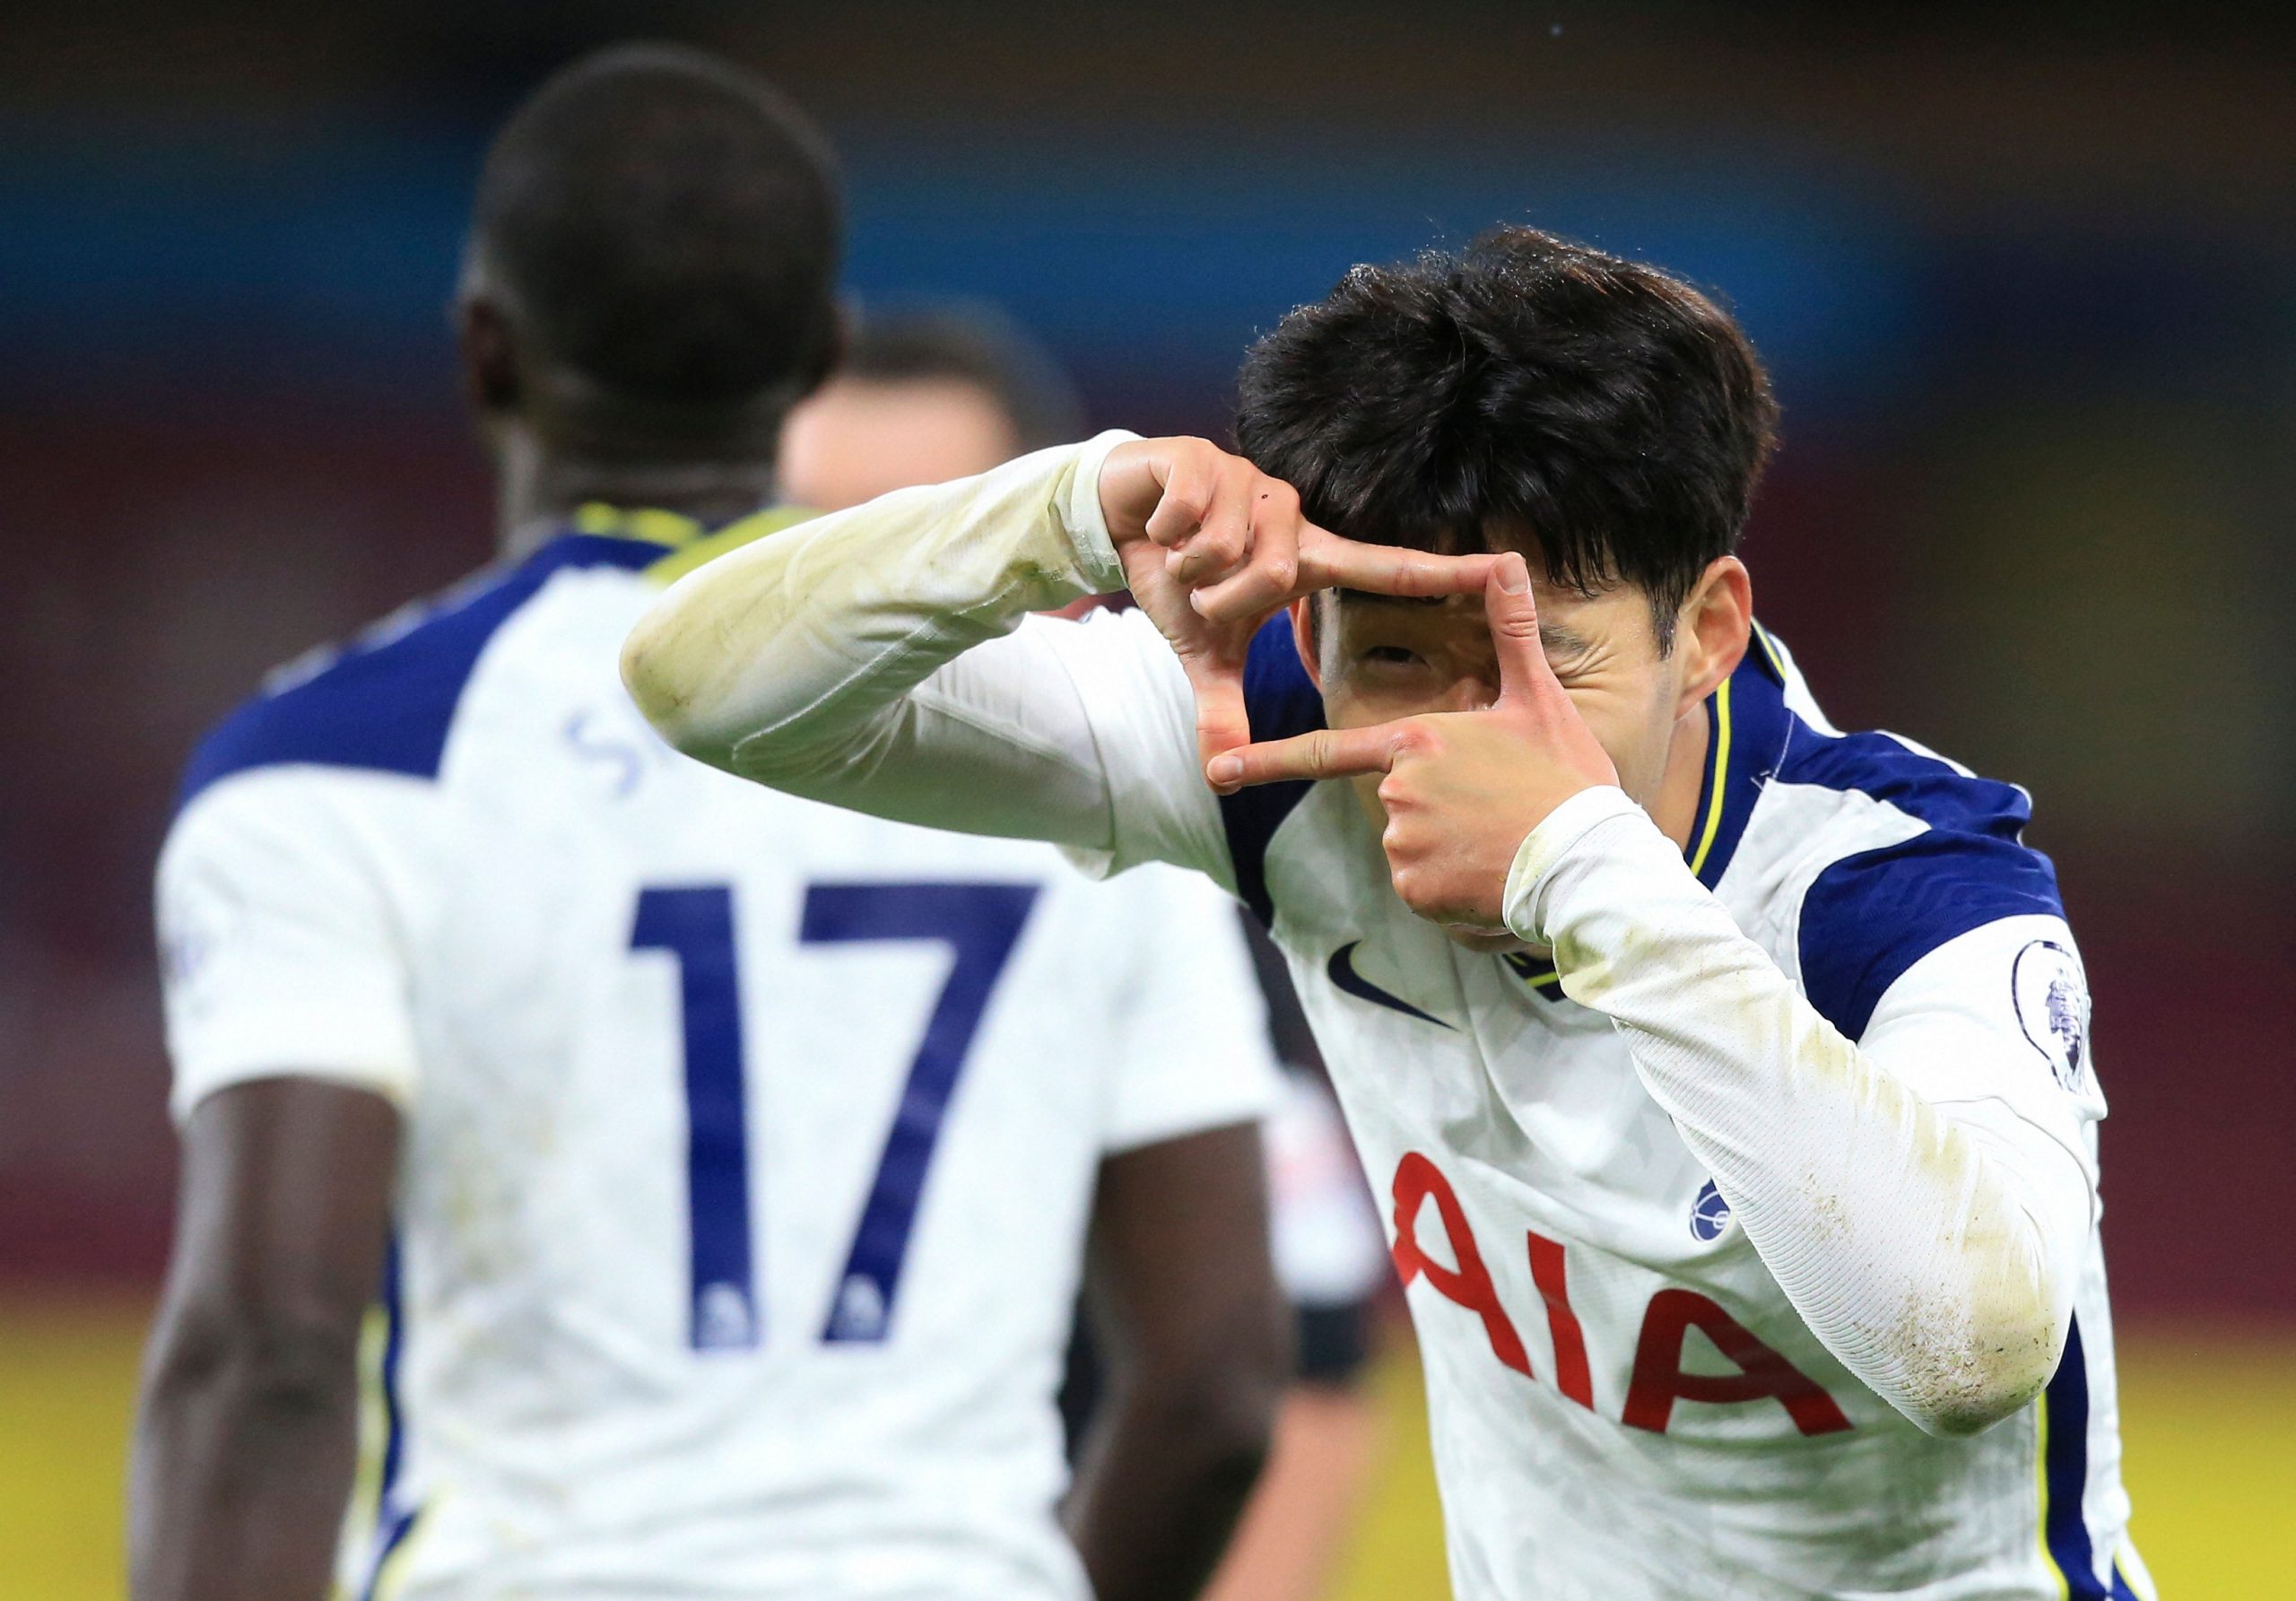 Tottenham Hotspur sink Manchester City to take top spot, Chelsea up to second